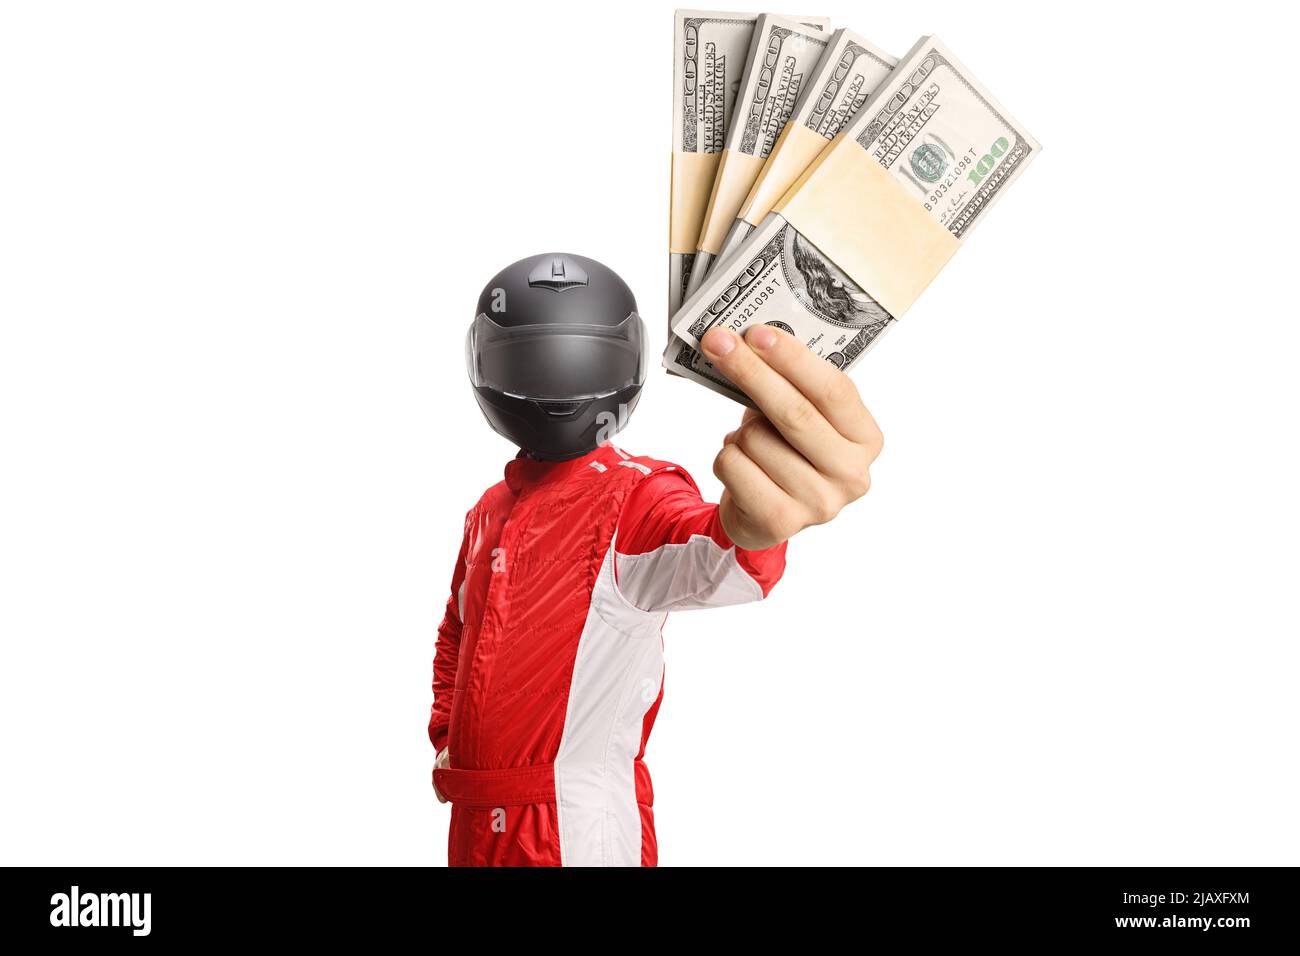 Racer with a helmet holding stacks of money isolated on white background Stock Photo